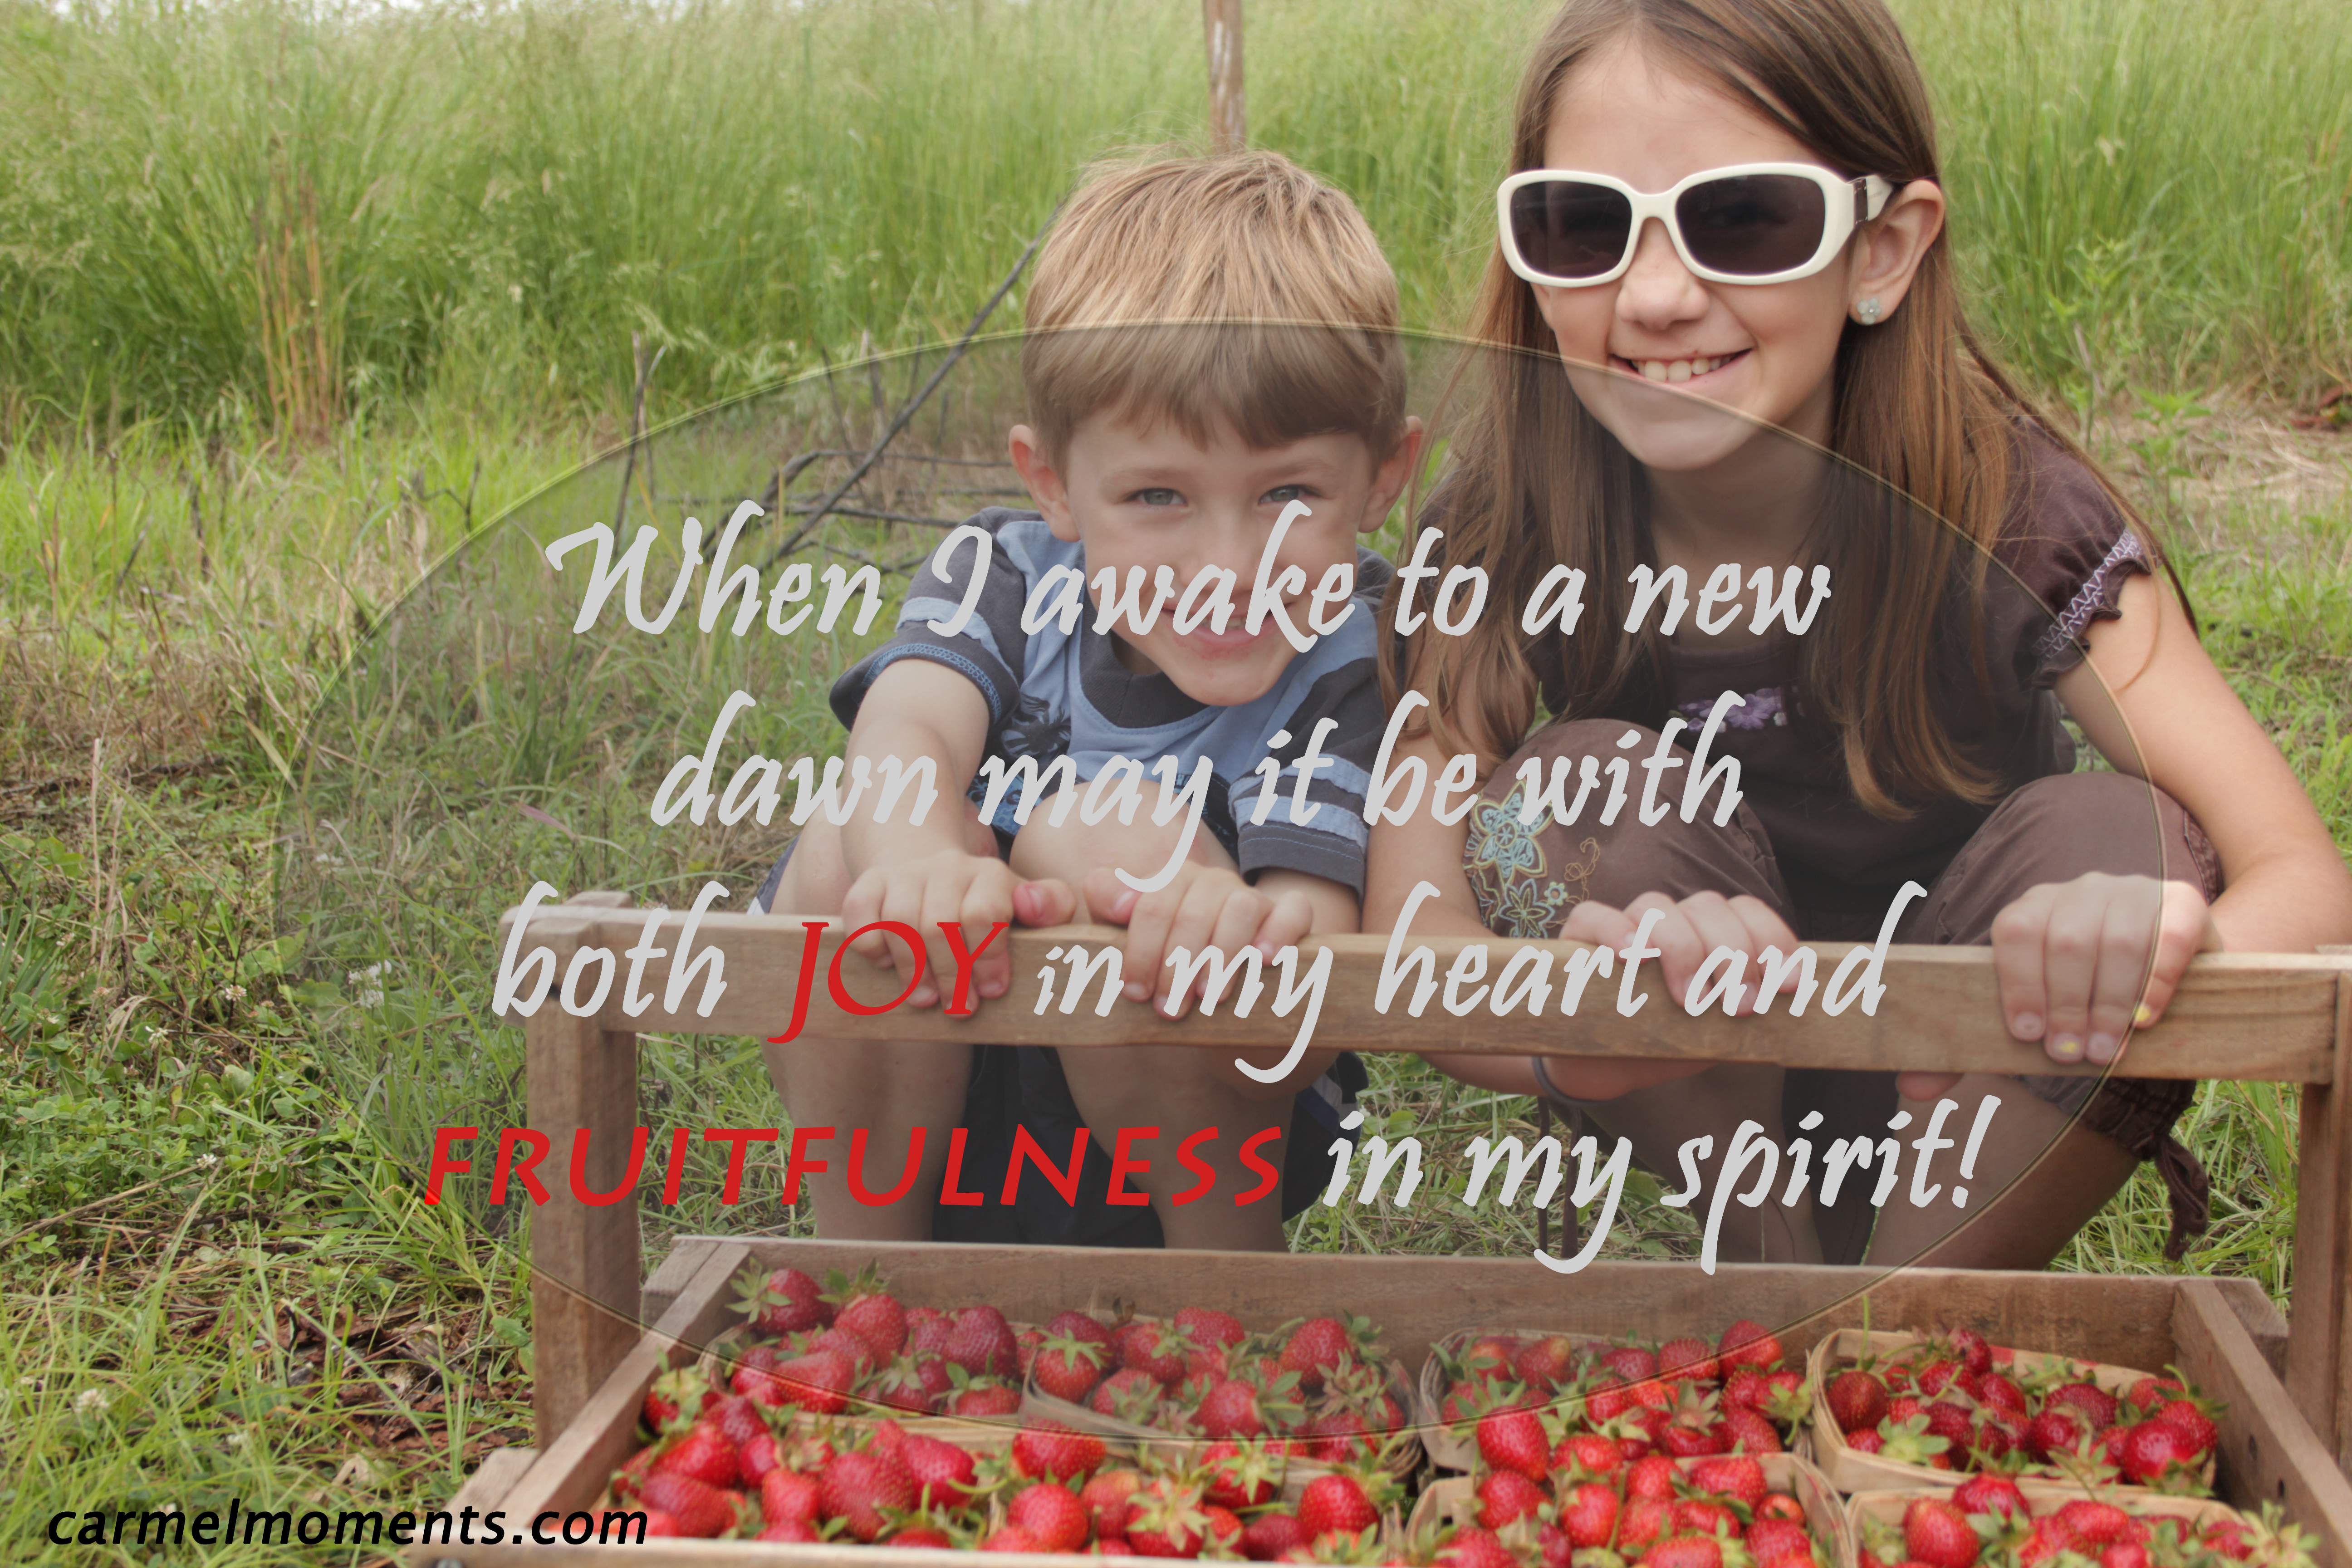 When I awake to a new dawn may it be with both joy in my heart and fruitfulness in my spirit!